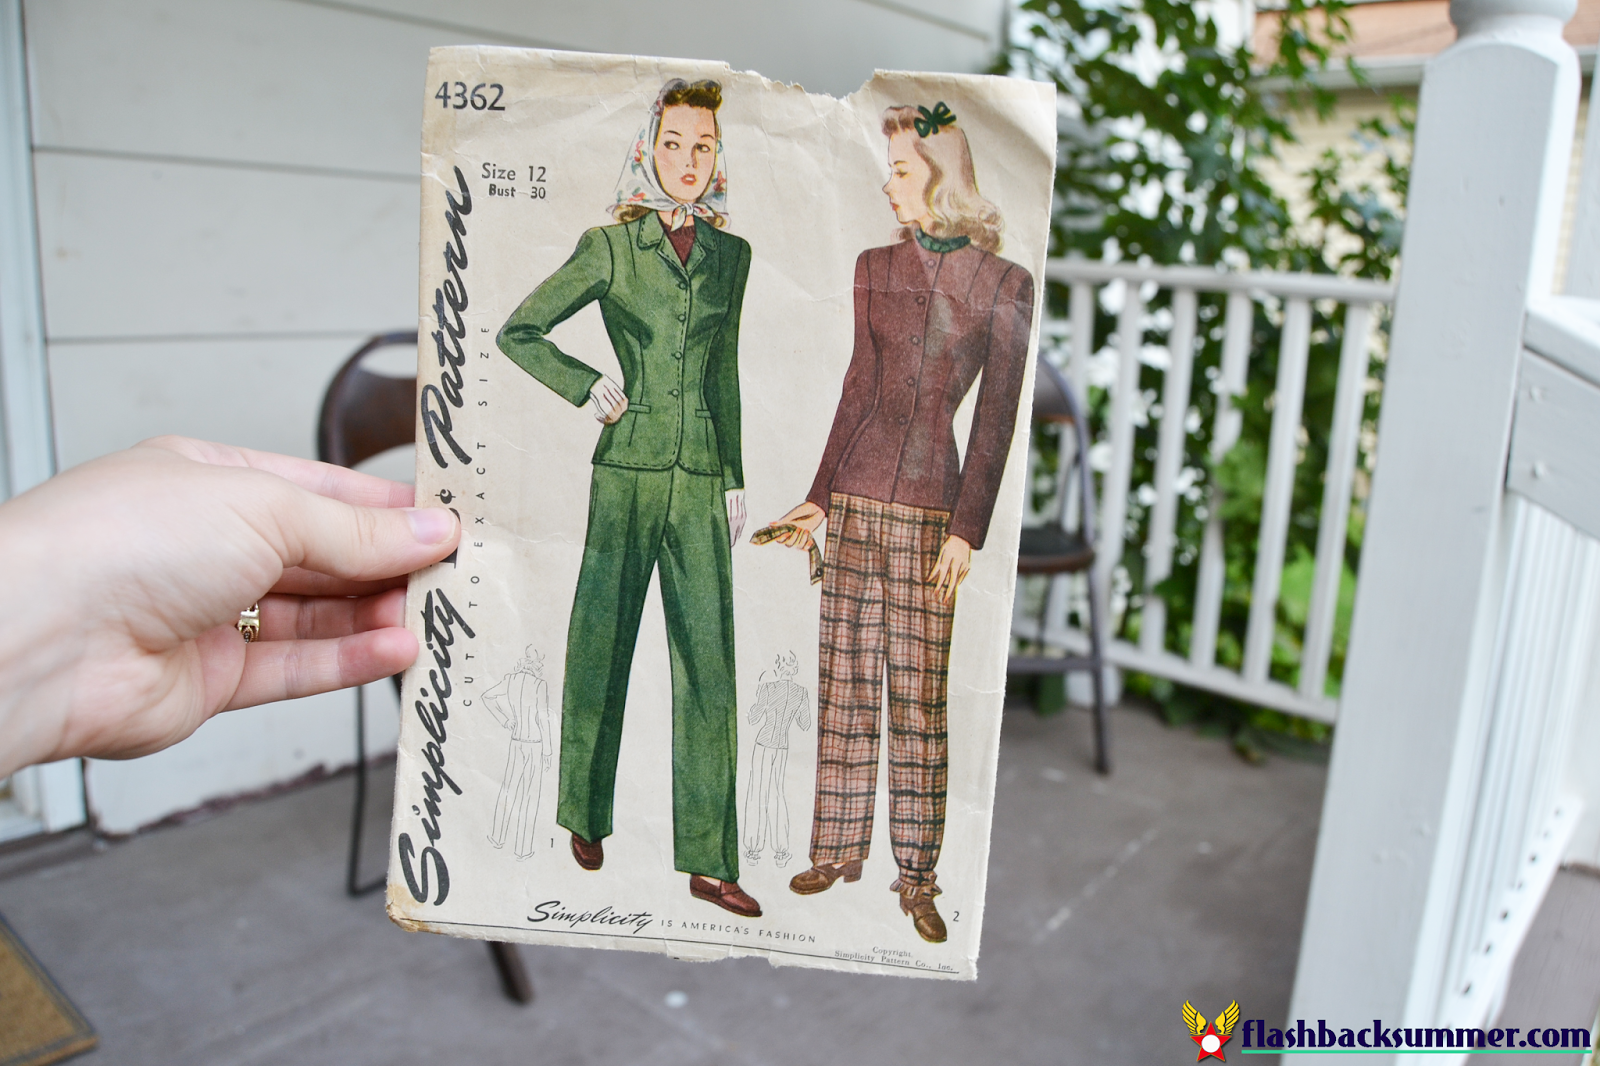 Flashback Summer: My First Me-Made 1940s Suit - Simplicity 4362